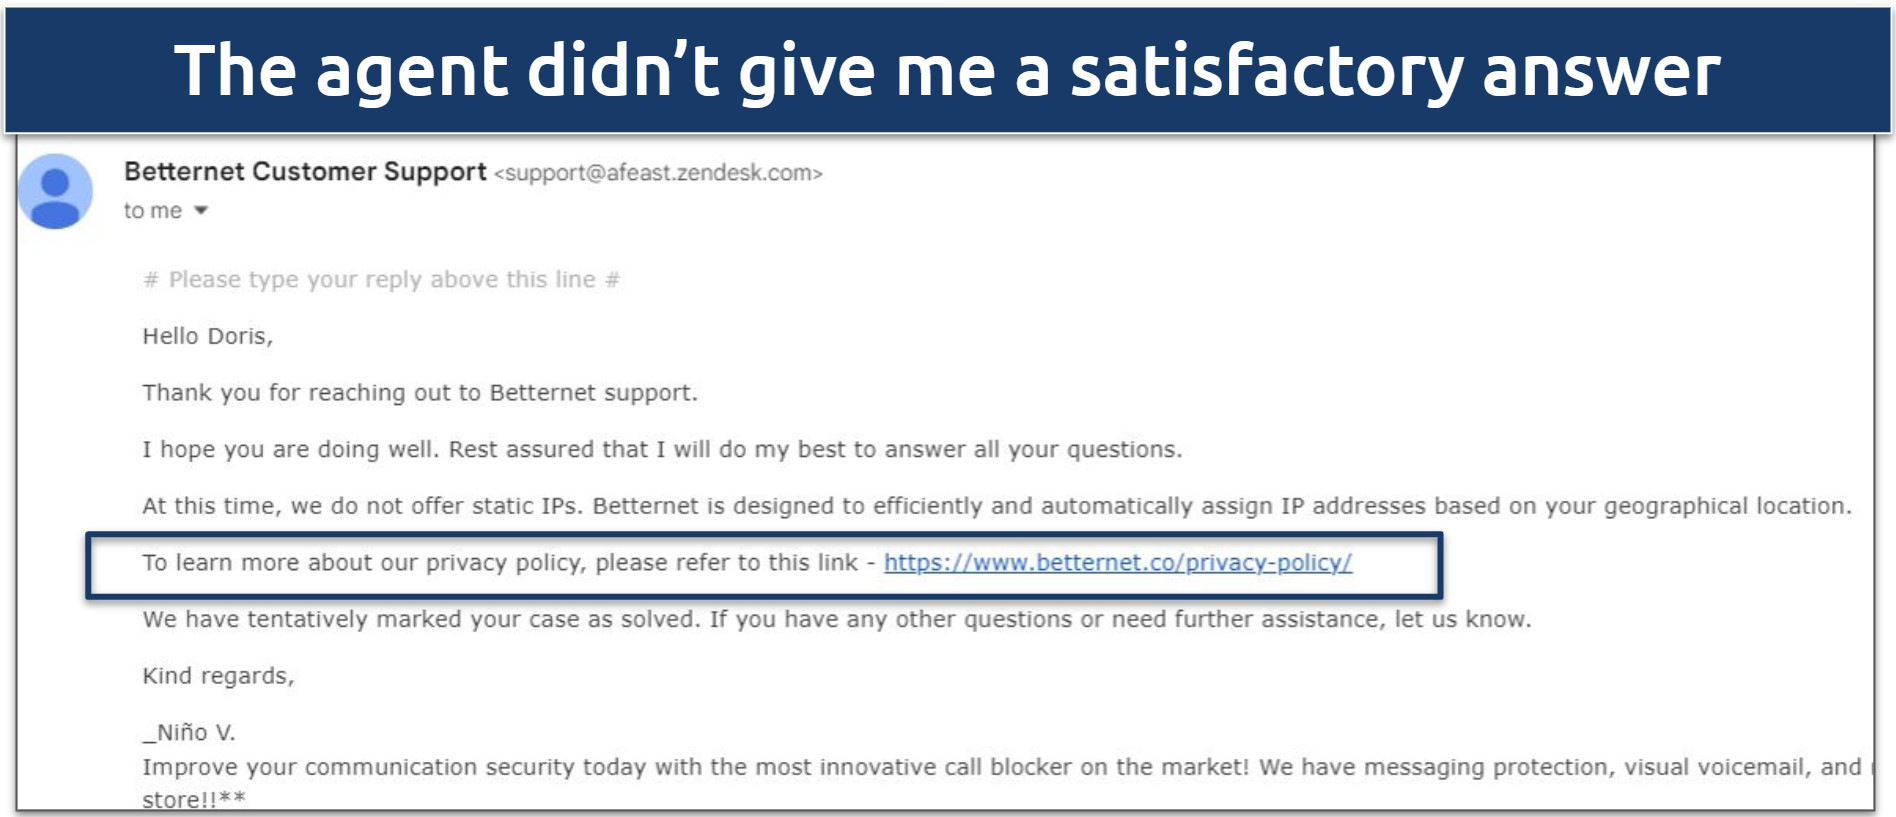 Screenshot of an email response from Bettenet customer support with vague answer